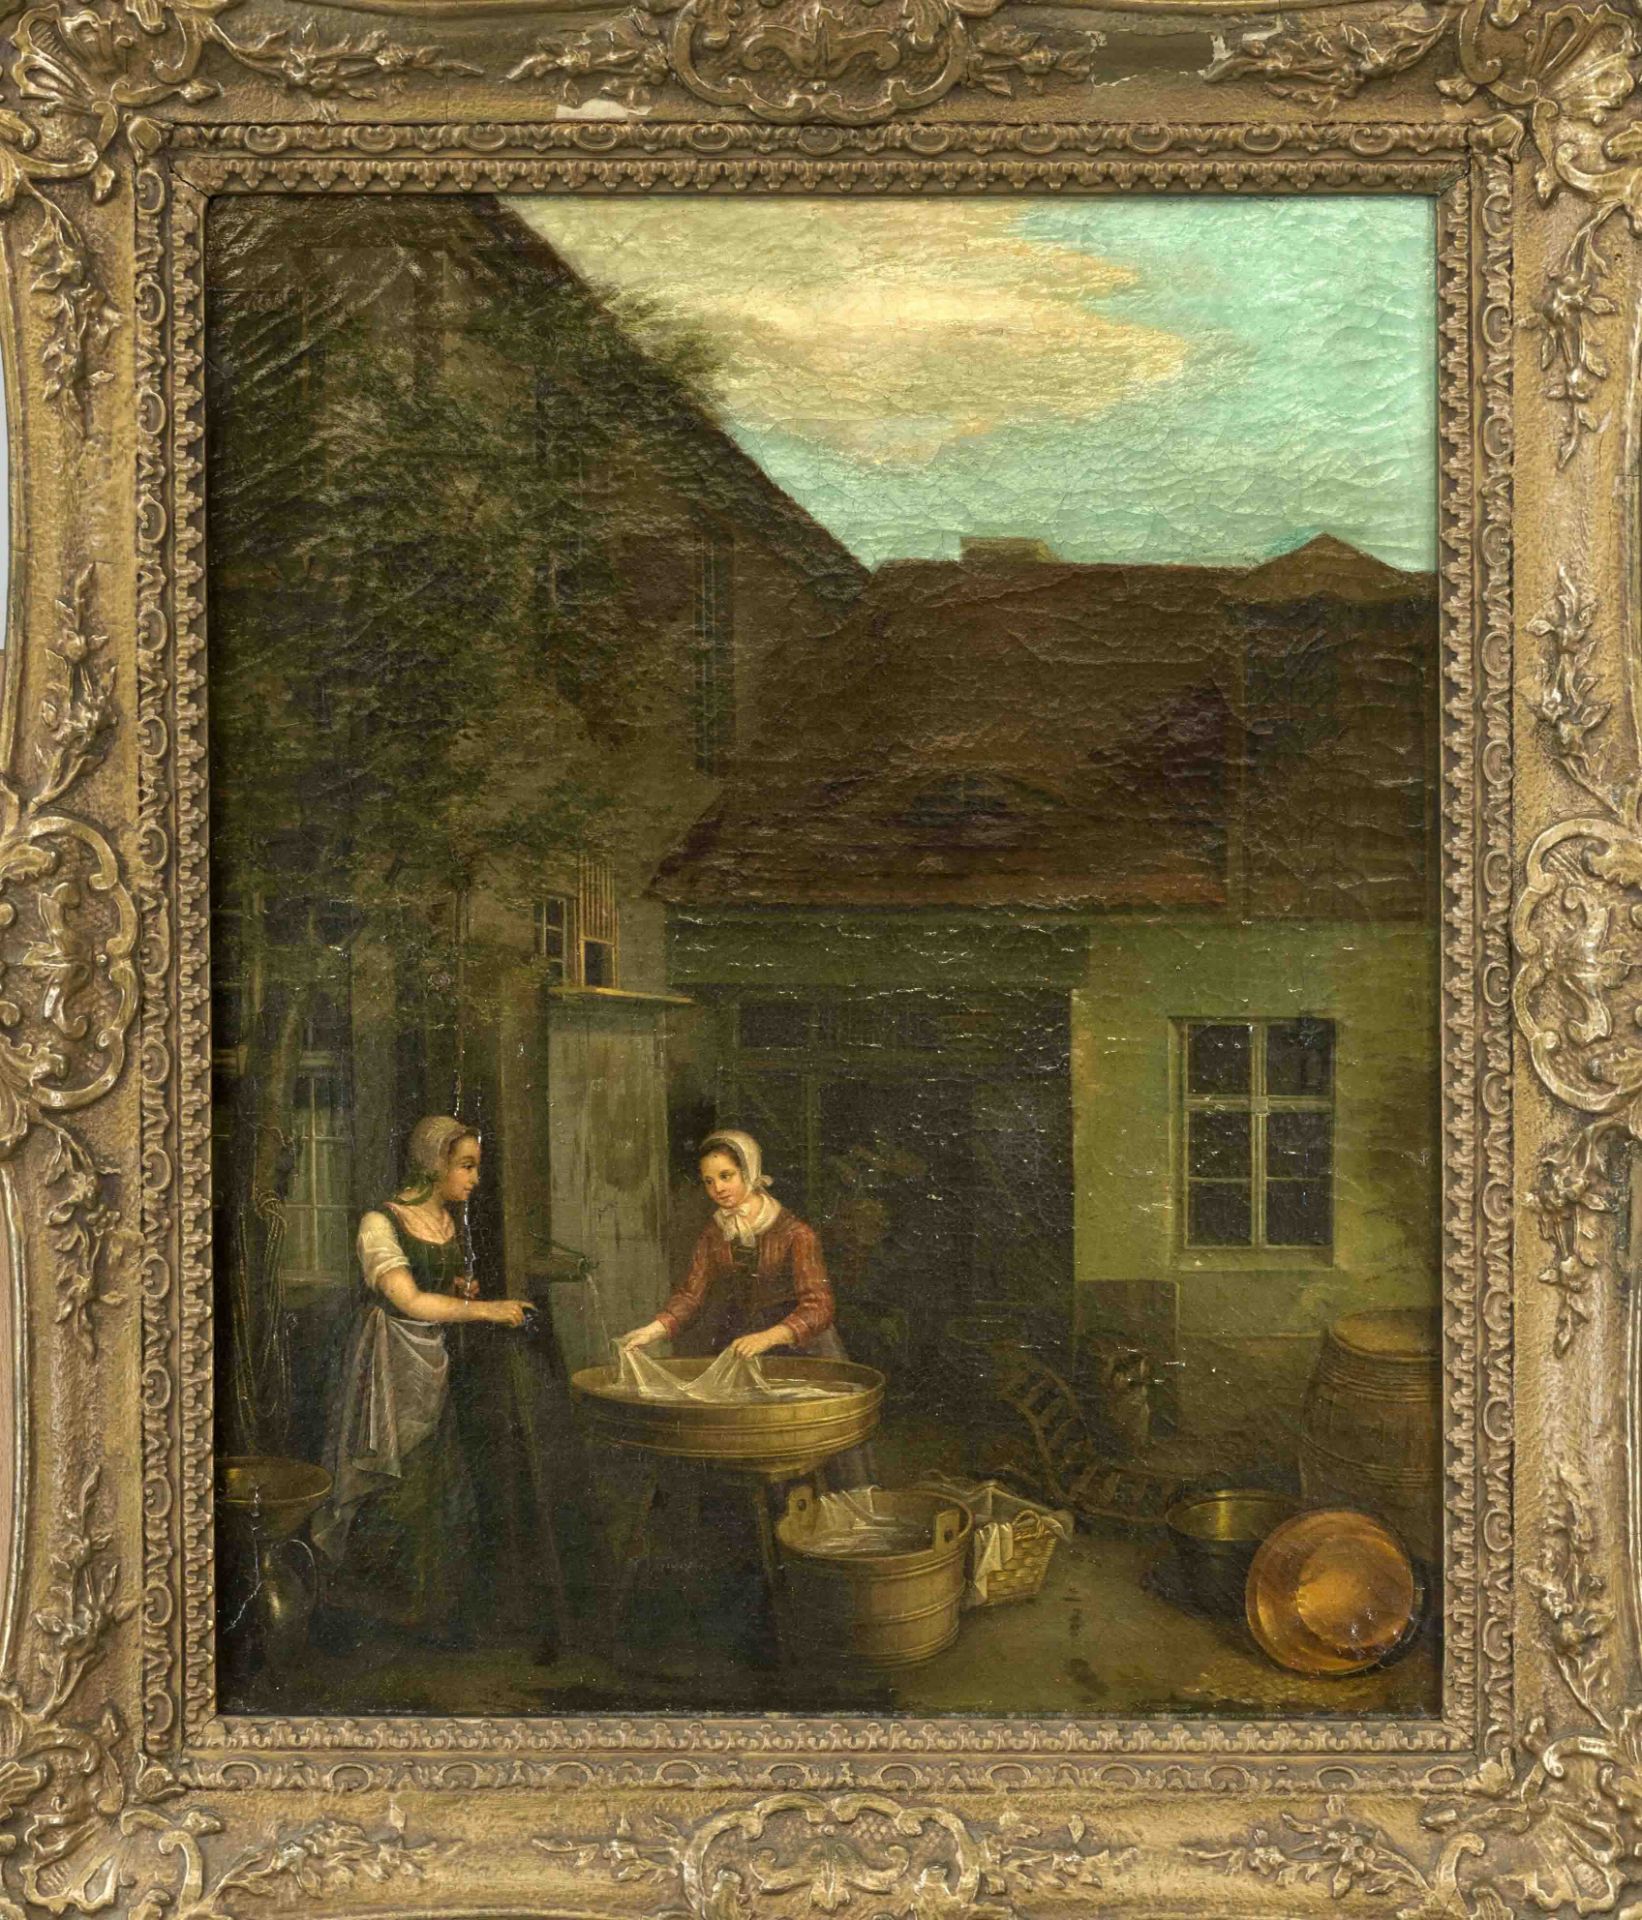 Anonymous genre painter c. 1850, Washerwomen with all kinds of utensils in the backyard, oil on